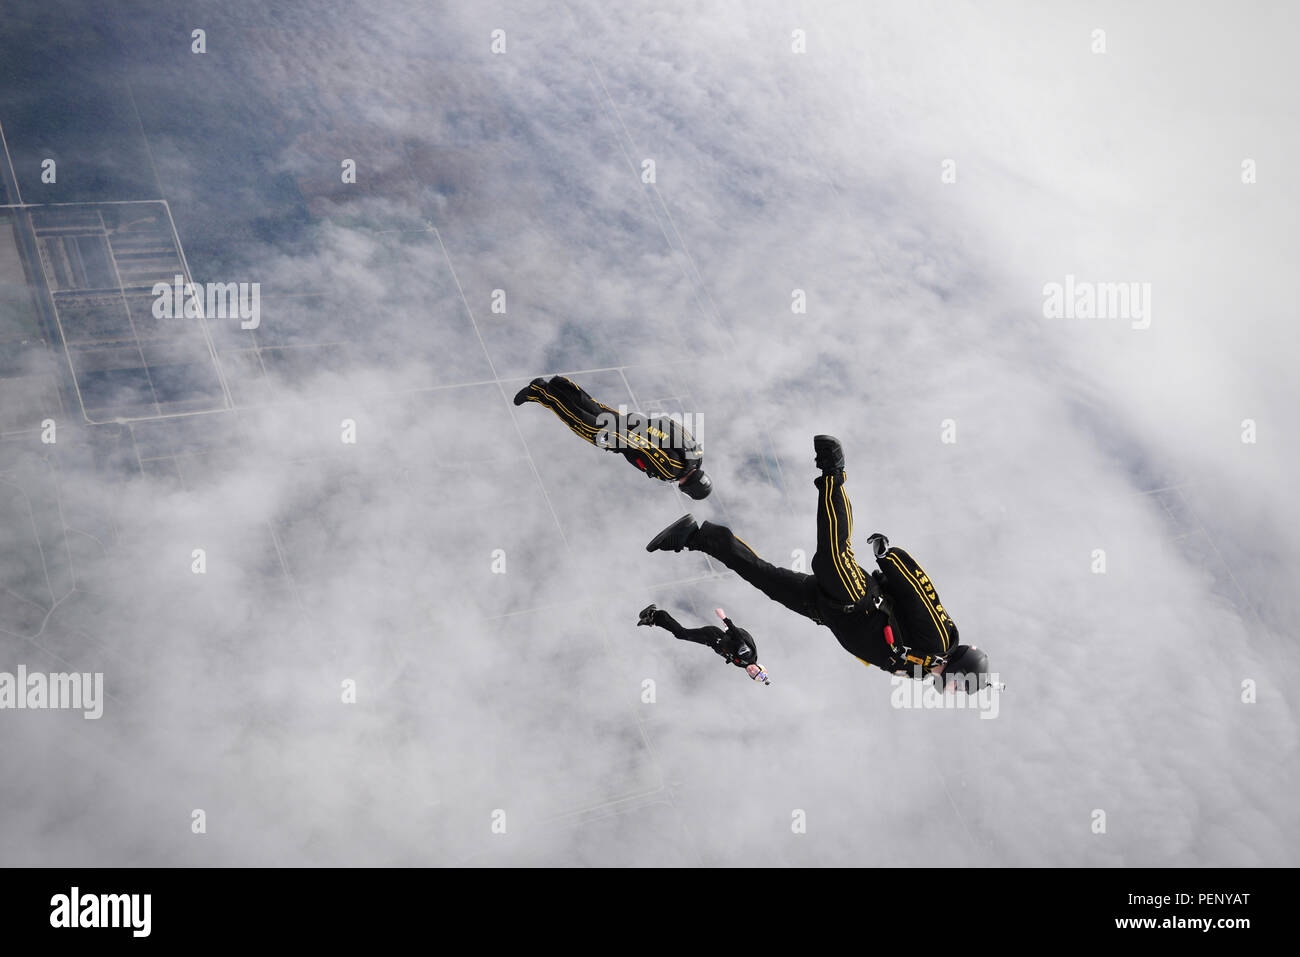 Staff Sgt. Brandon Parra, Spc. Jason Winger and instructor Mike Sanson, all members of the Army's Golden Knights demonstration team, conduct a training jump over Homestead Air Reserve Base on Jan. 19, 2016. (U.S. Air National Guard Staff Sgt. Christopher S. Muncy / released) Stock Photo